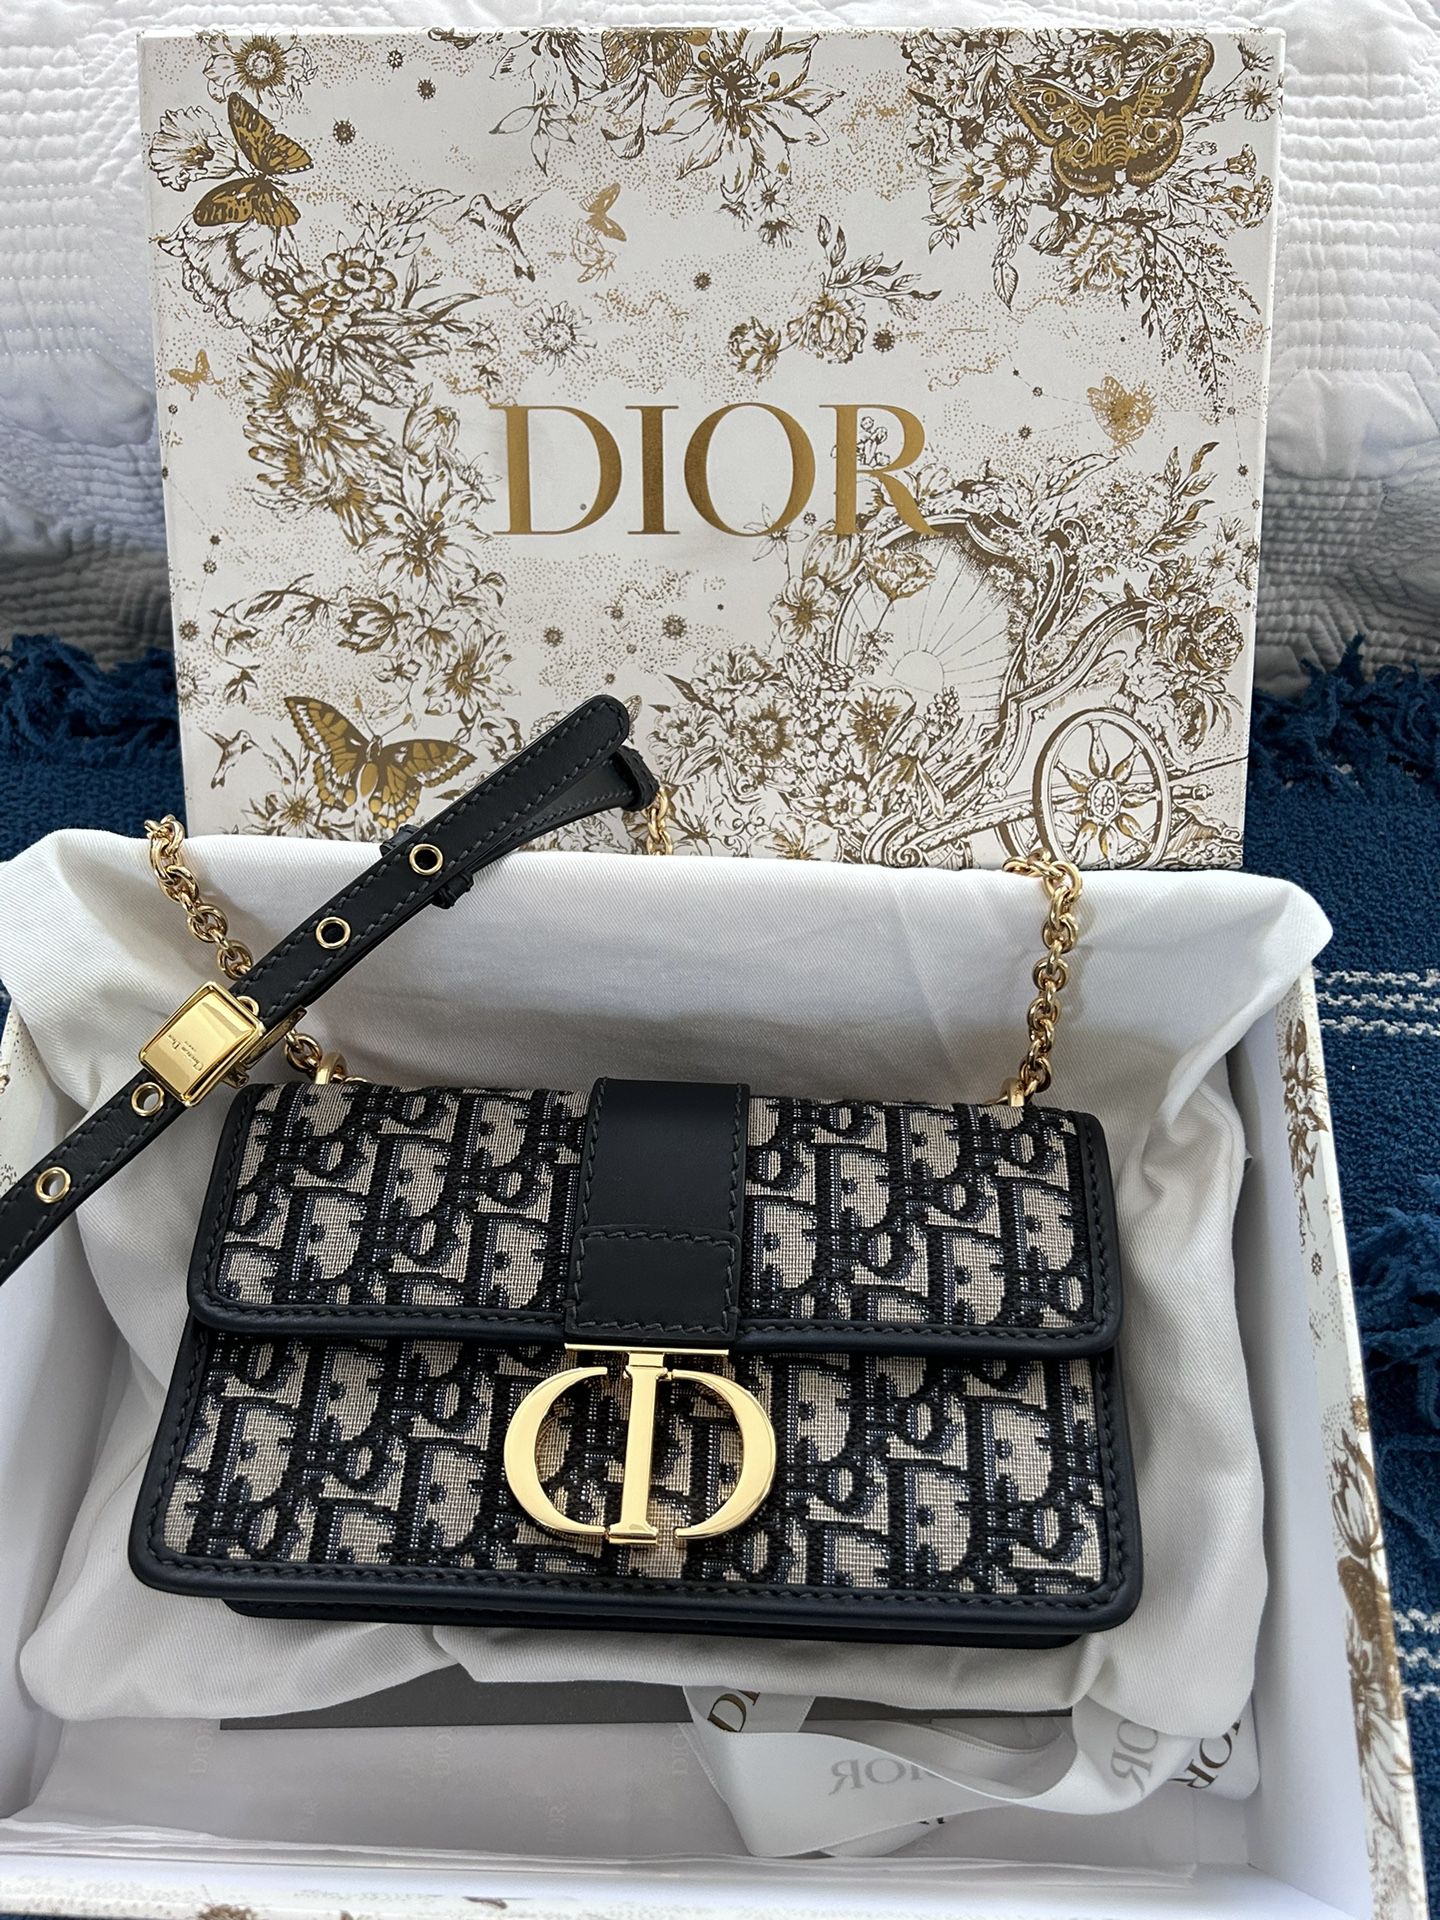 DIOR SHOPPING VLOG - NEW 30 MONTAIGNE EAST WEST BAG, LADY DIOR